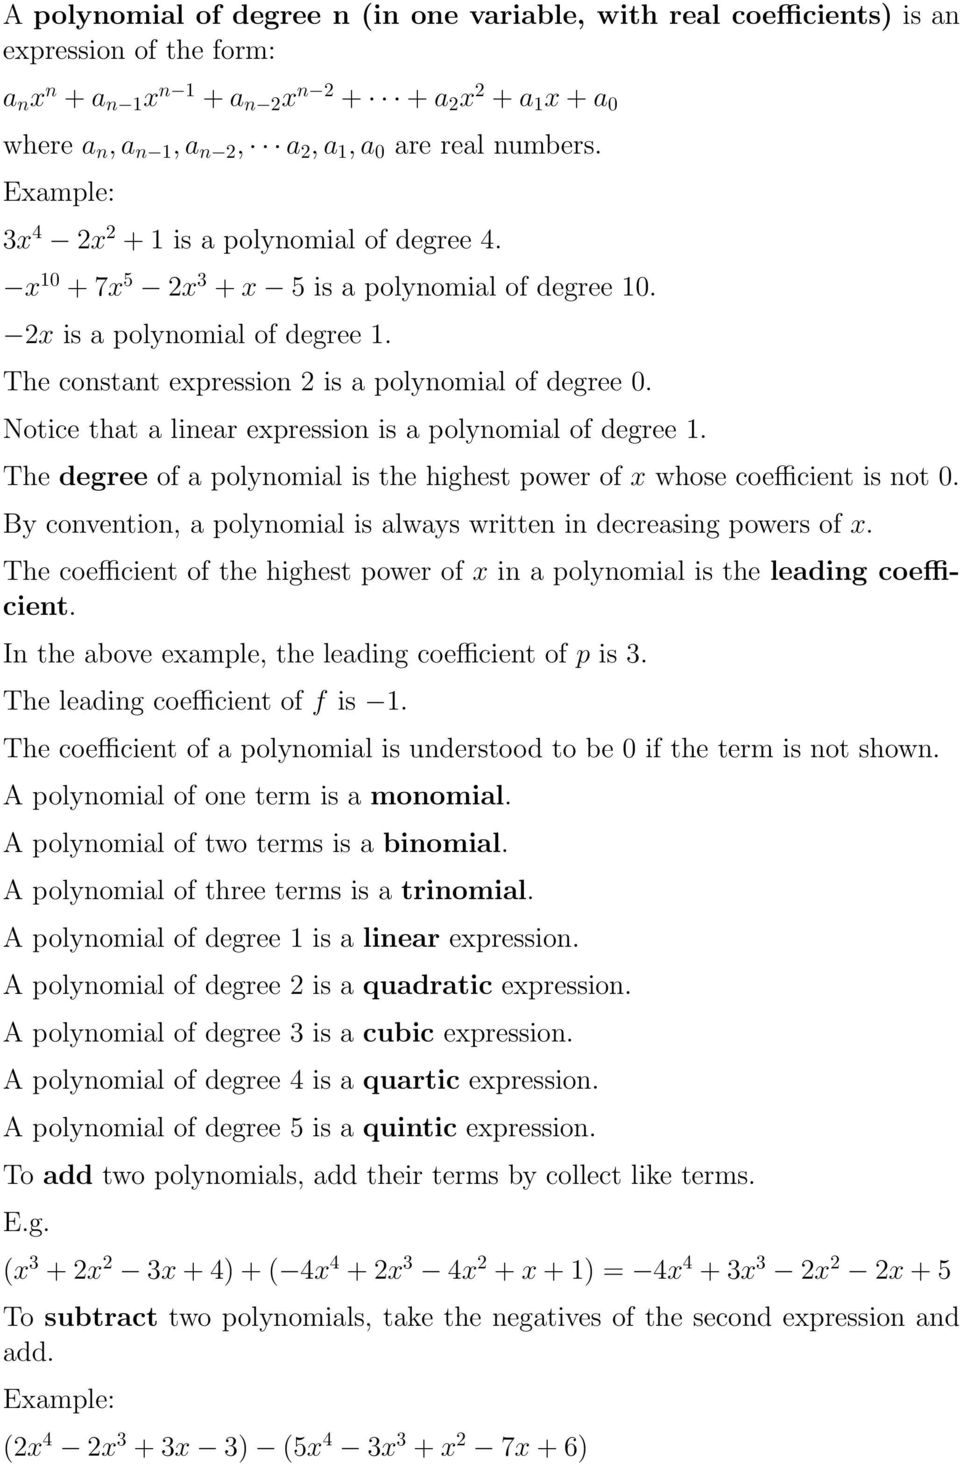 The constant expression 2 is a polynomial of degree 0. Notice that a linear expression is a polynomial of degree 1. The degree of a polynomial is the highest power of x whose coefficient is not 0.